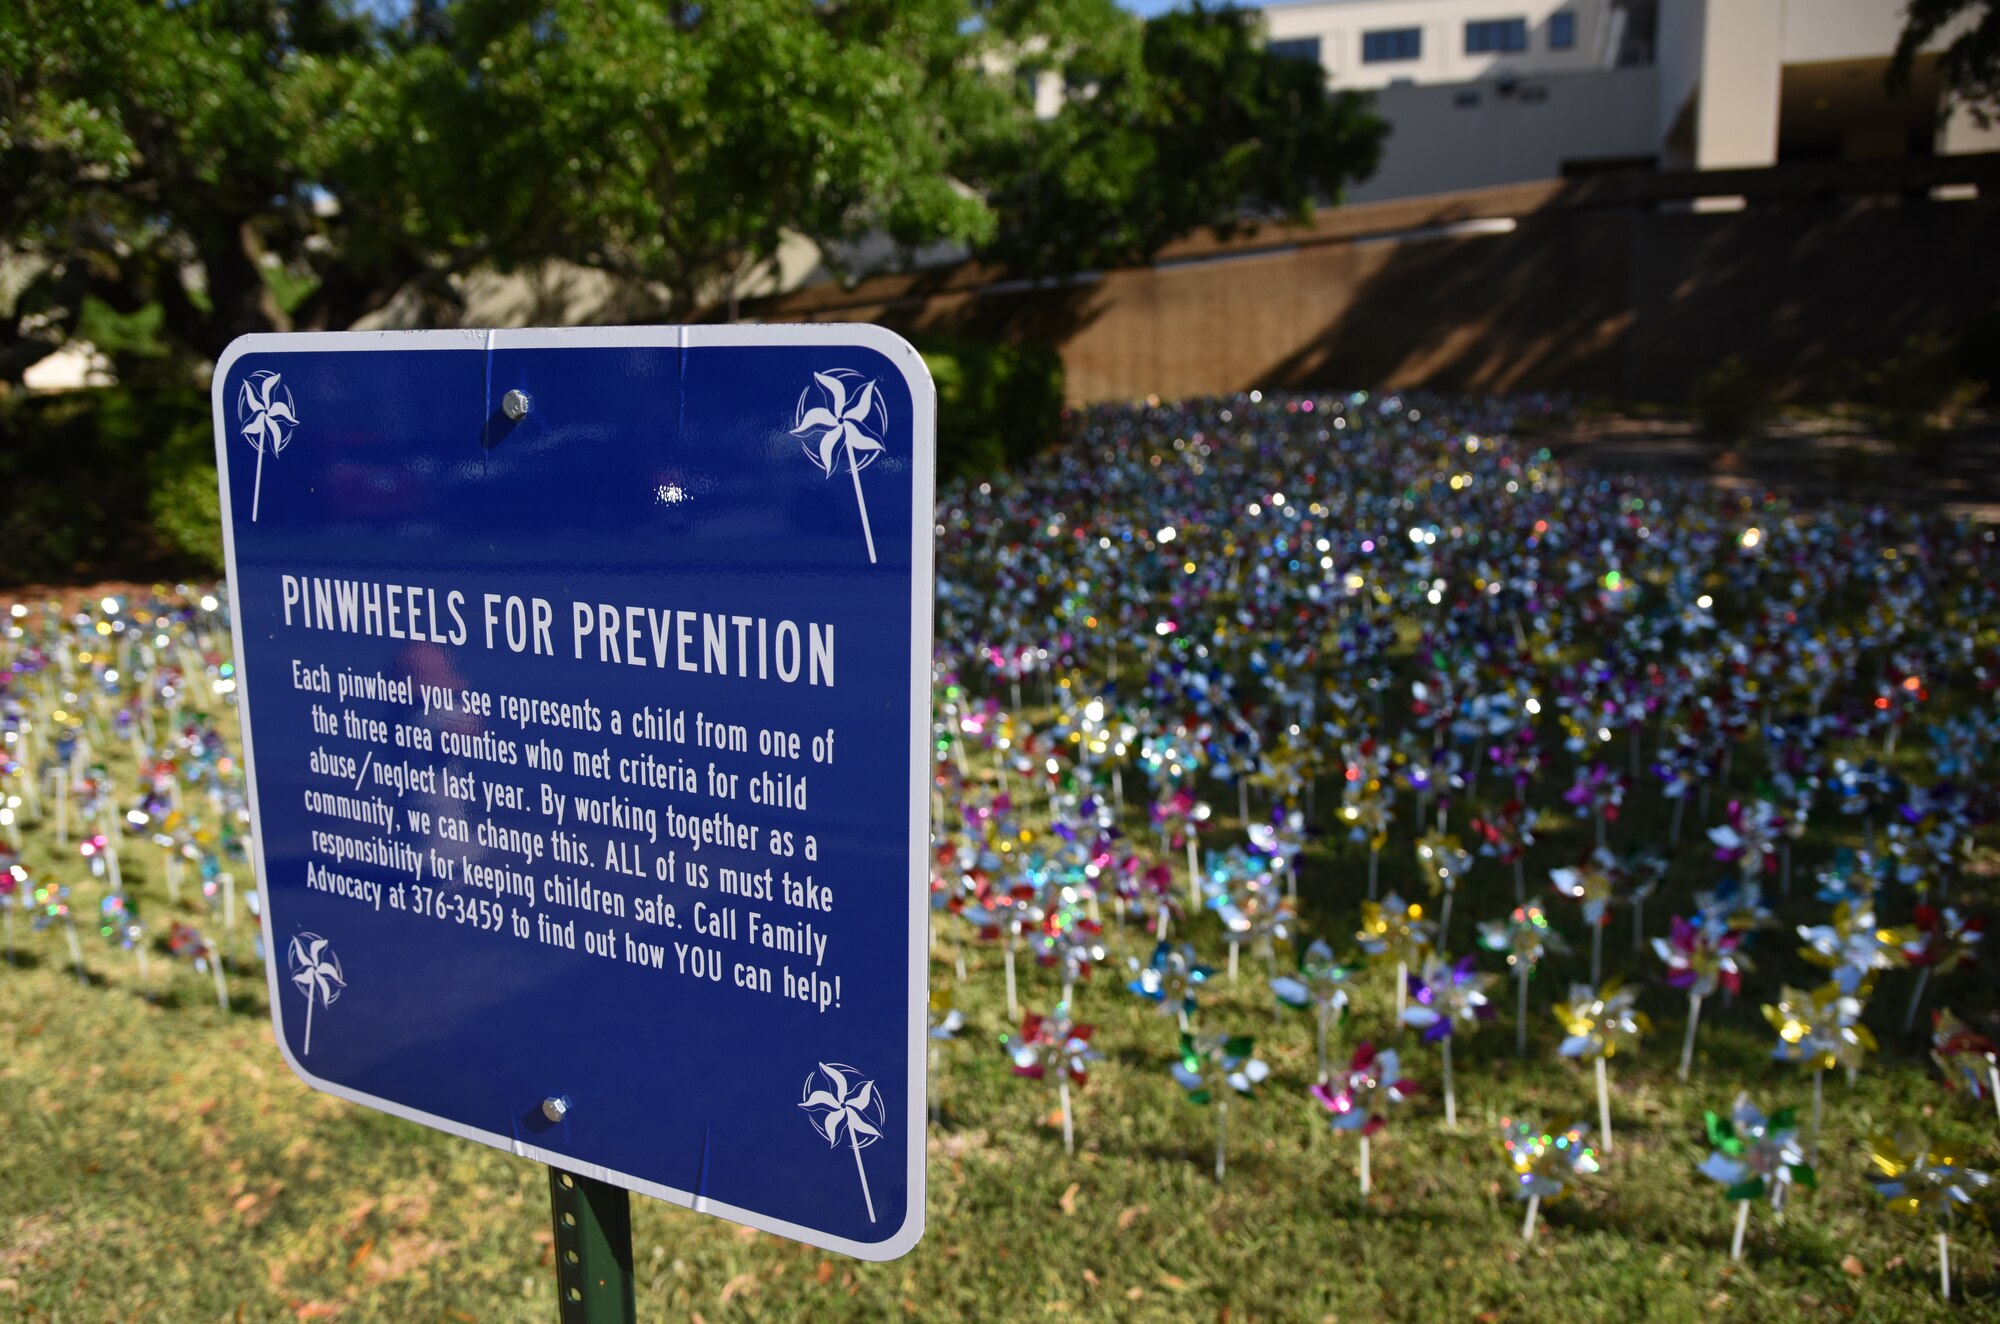 Pinwheels are displayed in front of the Keesler Medical Center at Keesler Air Force Base, Mississippi, April 11, 2018. Members of the 81st Medical Operations Squadron family advocacy and volunteers placed pinwheels to individually represent children in the three area counties who were victims of child abuse or neglect last year. April is National Child Abuse Prevention Month, which focuses on how to prevent child abuse and neglect as well as promoting child and family well-being. (U.S. Air Force photo by Kemberly Groue)